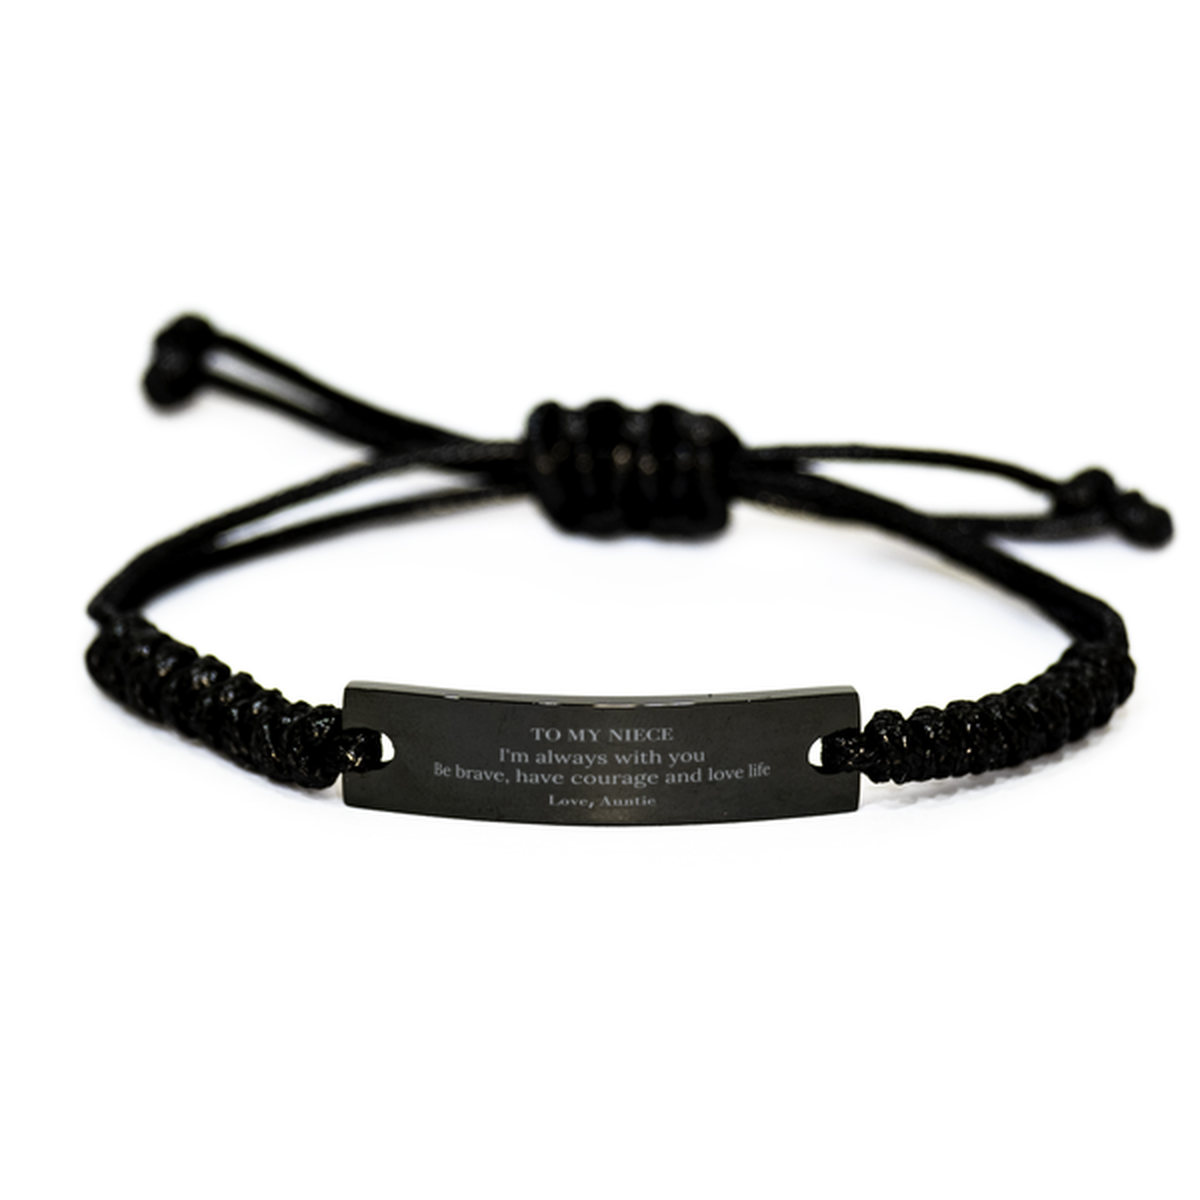 To My Niece Gifts from Auntie, Unique Black Rope Bracelet Inspirational Christmas Birthday Graduation Gifts for Niece I'm always with you. Be brave, have courage and love life. Love, Auntie